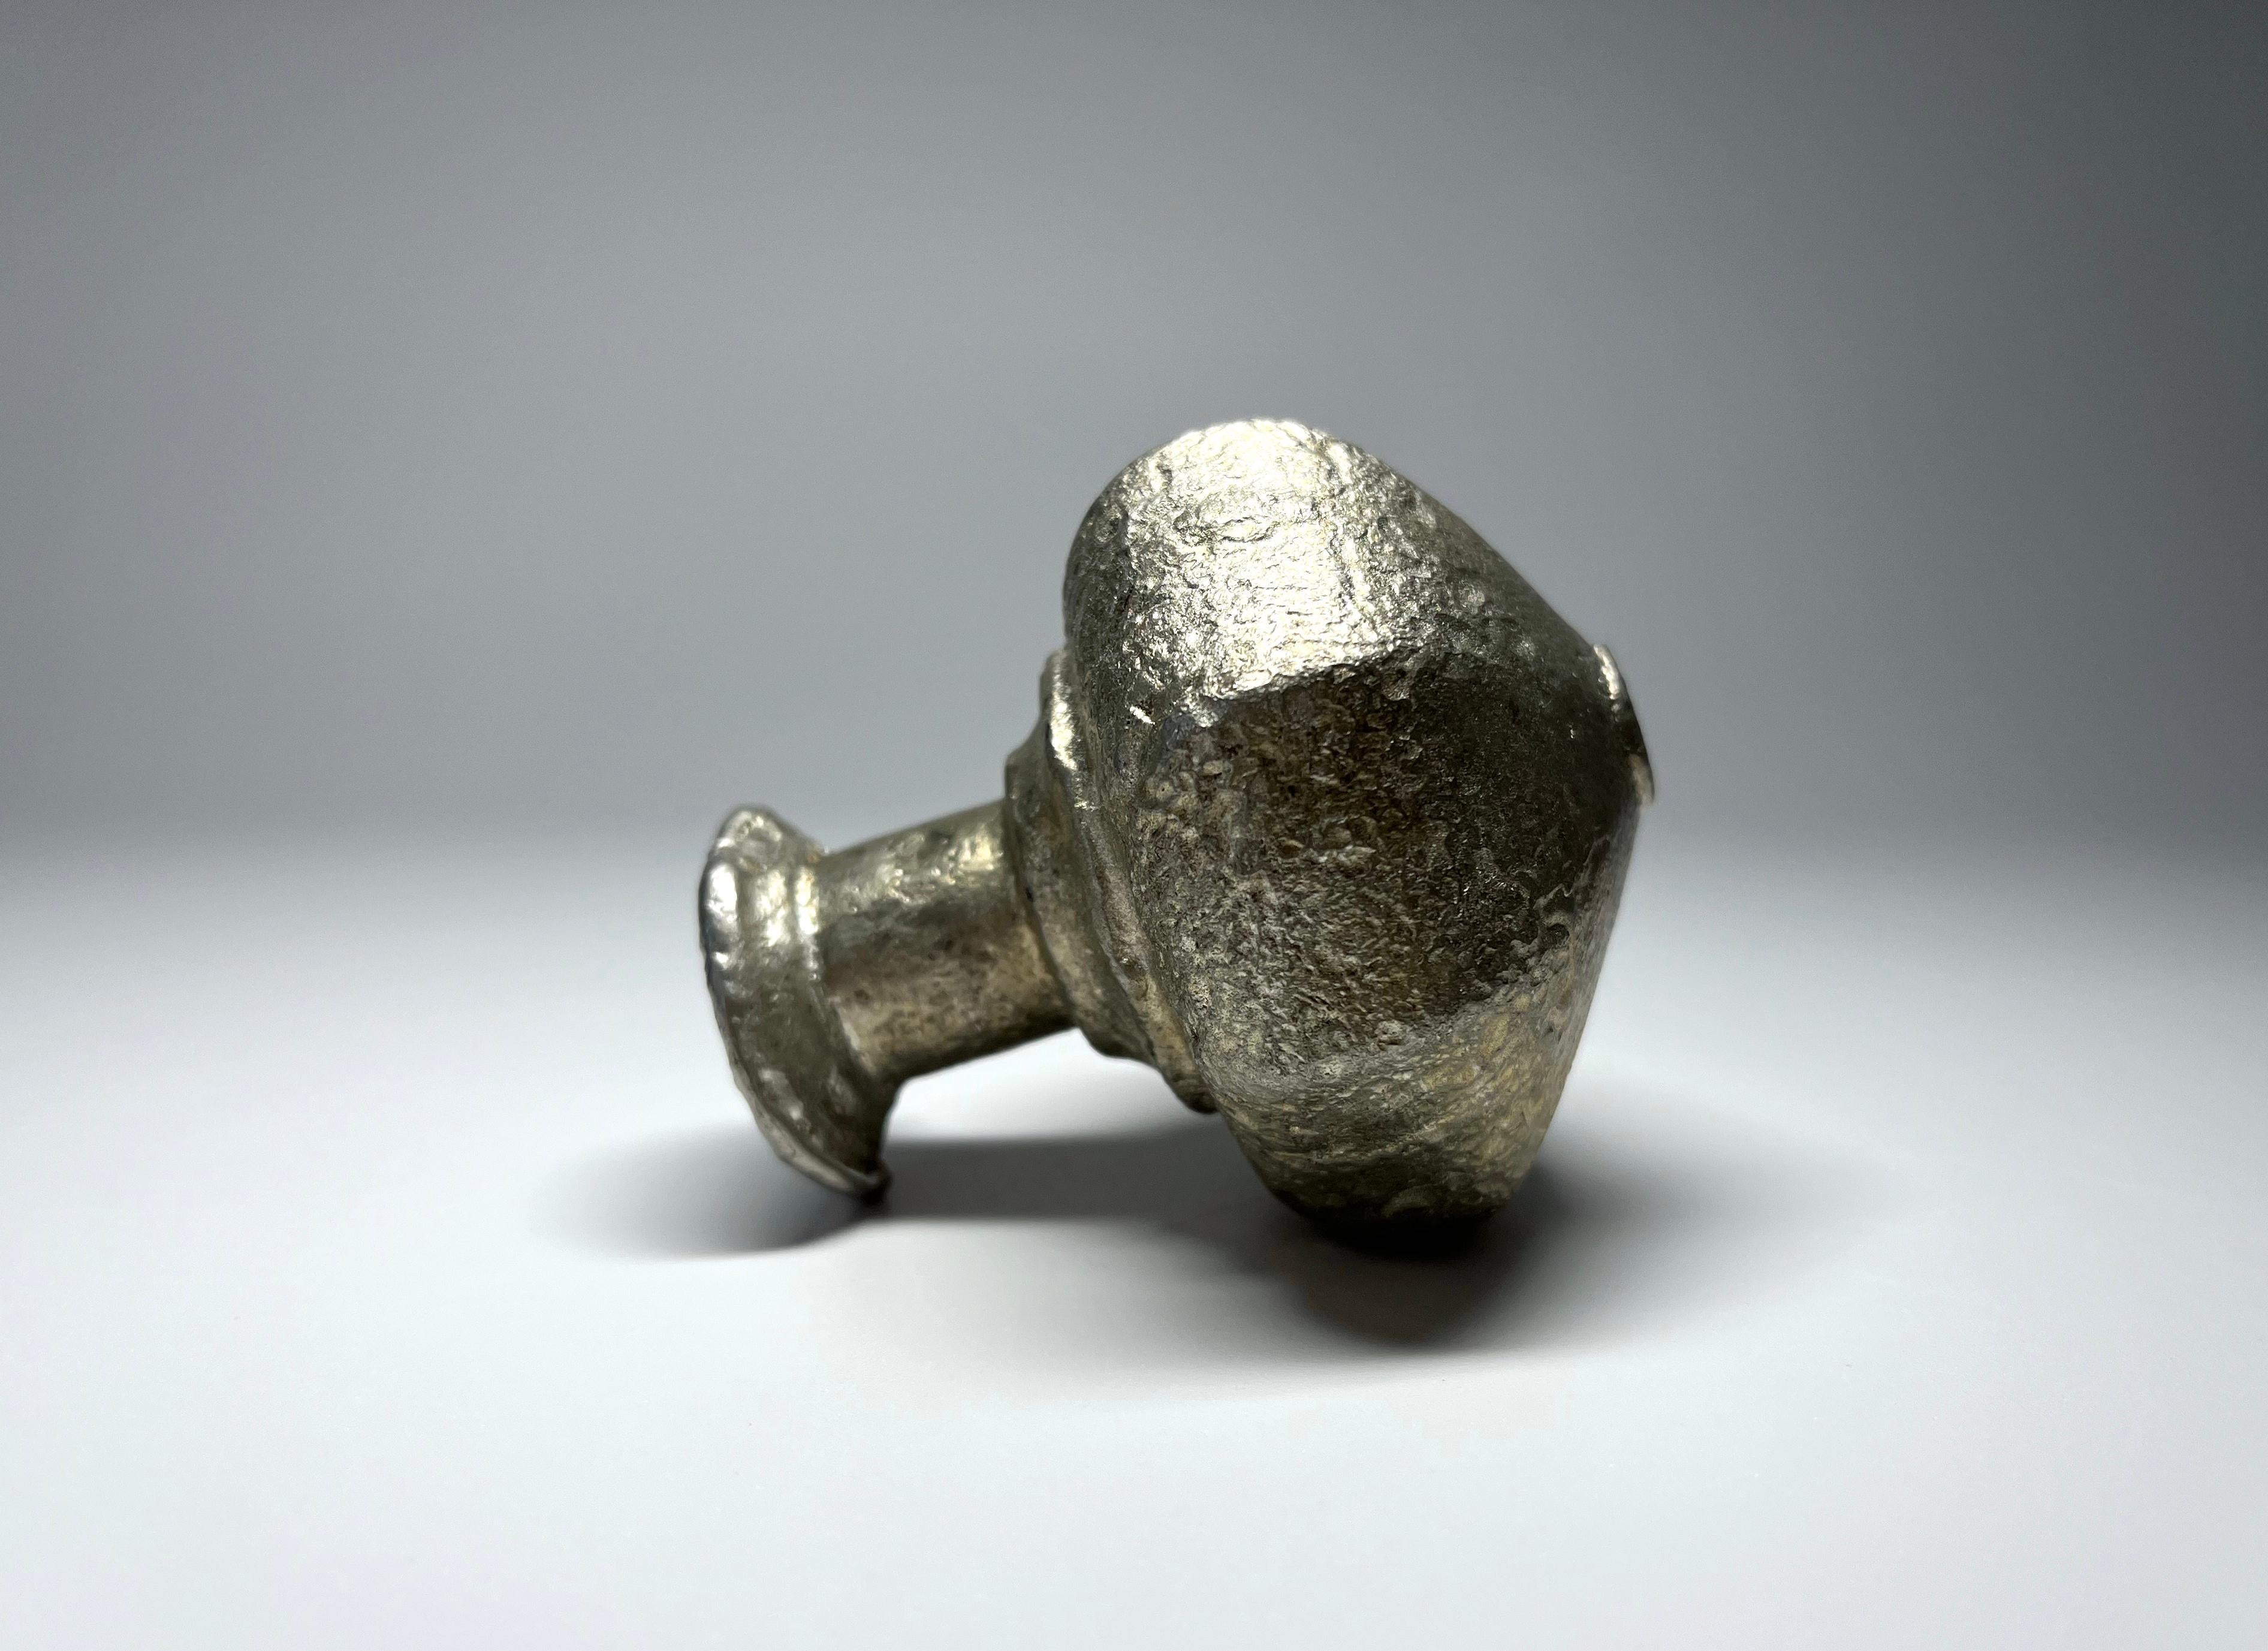 Original Glasgow School of Art, artist's proof of a pewter casting of a Victorian door knob
The mold for this one-off casting was created using a Victorian brass door knob - only one casting was produced and the bespoke two-part mold was destroyed,